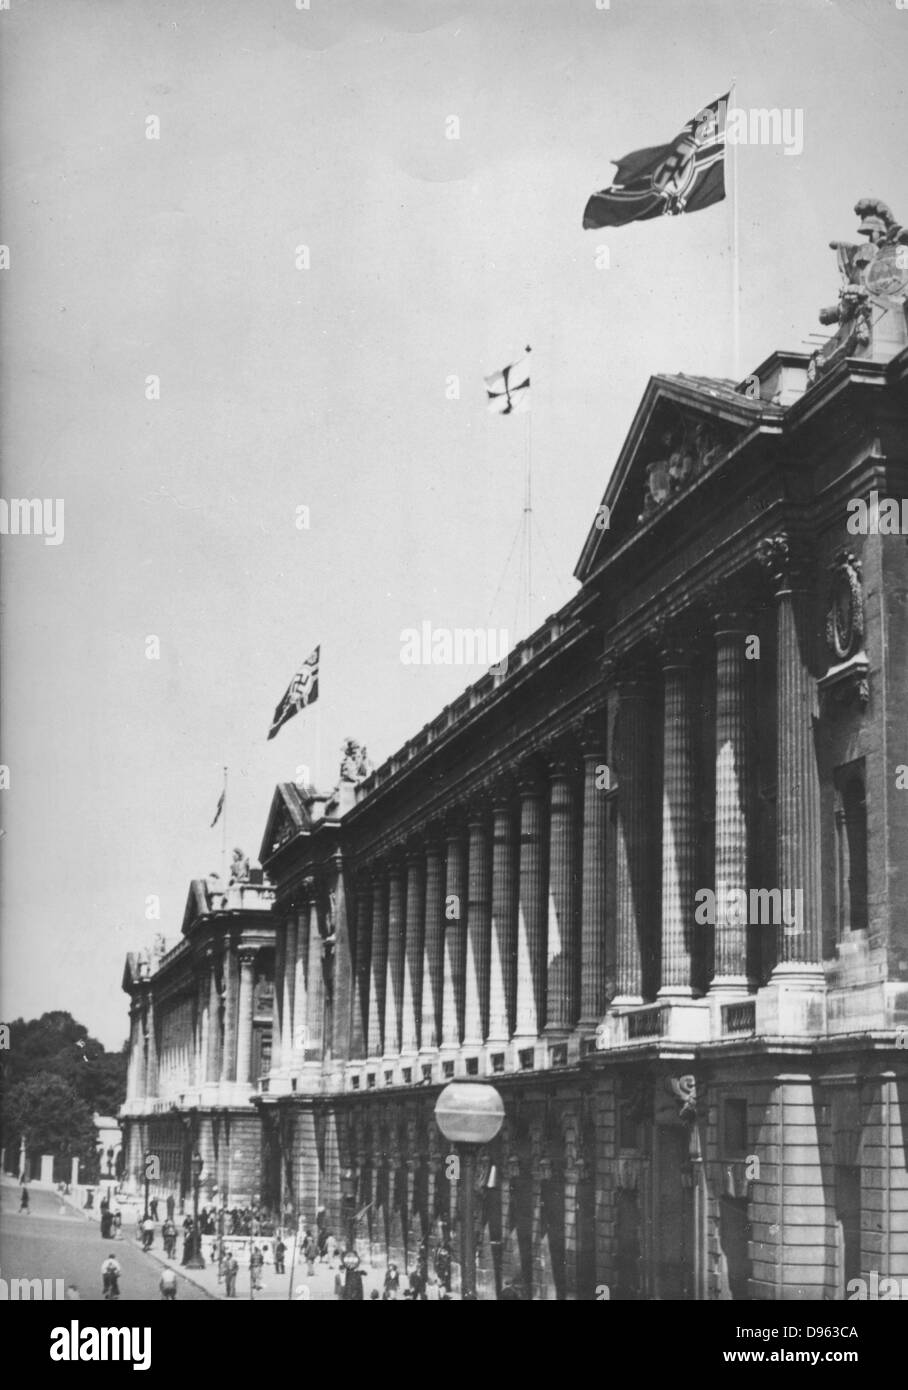 World War 2: Occupation of Paris by German invaders. The Nazi flag flying over the Ministry of the Marine building, Place de la Concorde, July 1940. Stock Photo